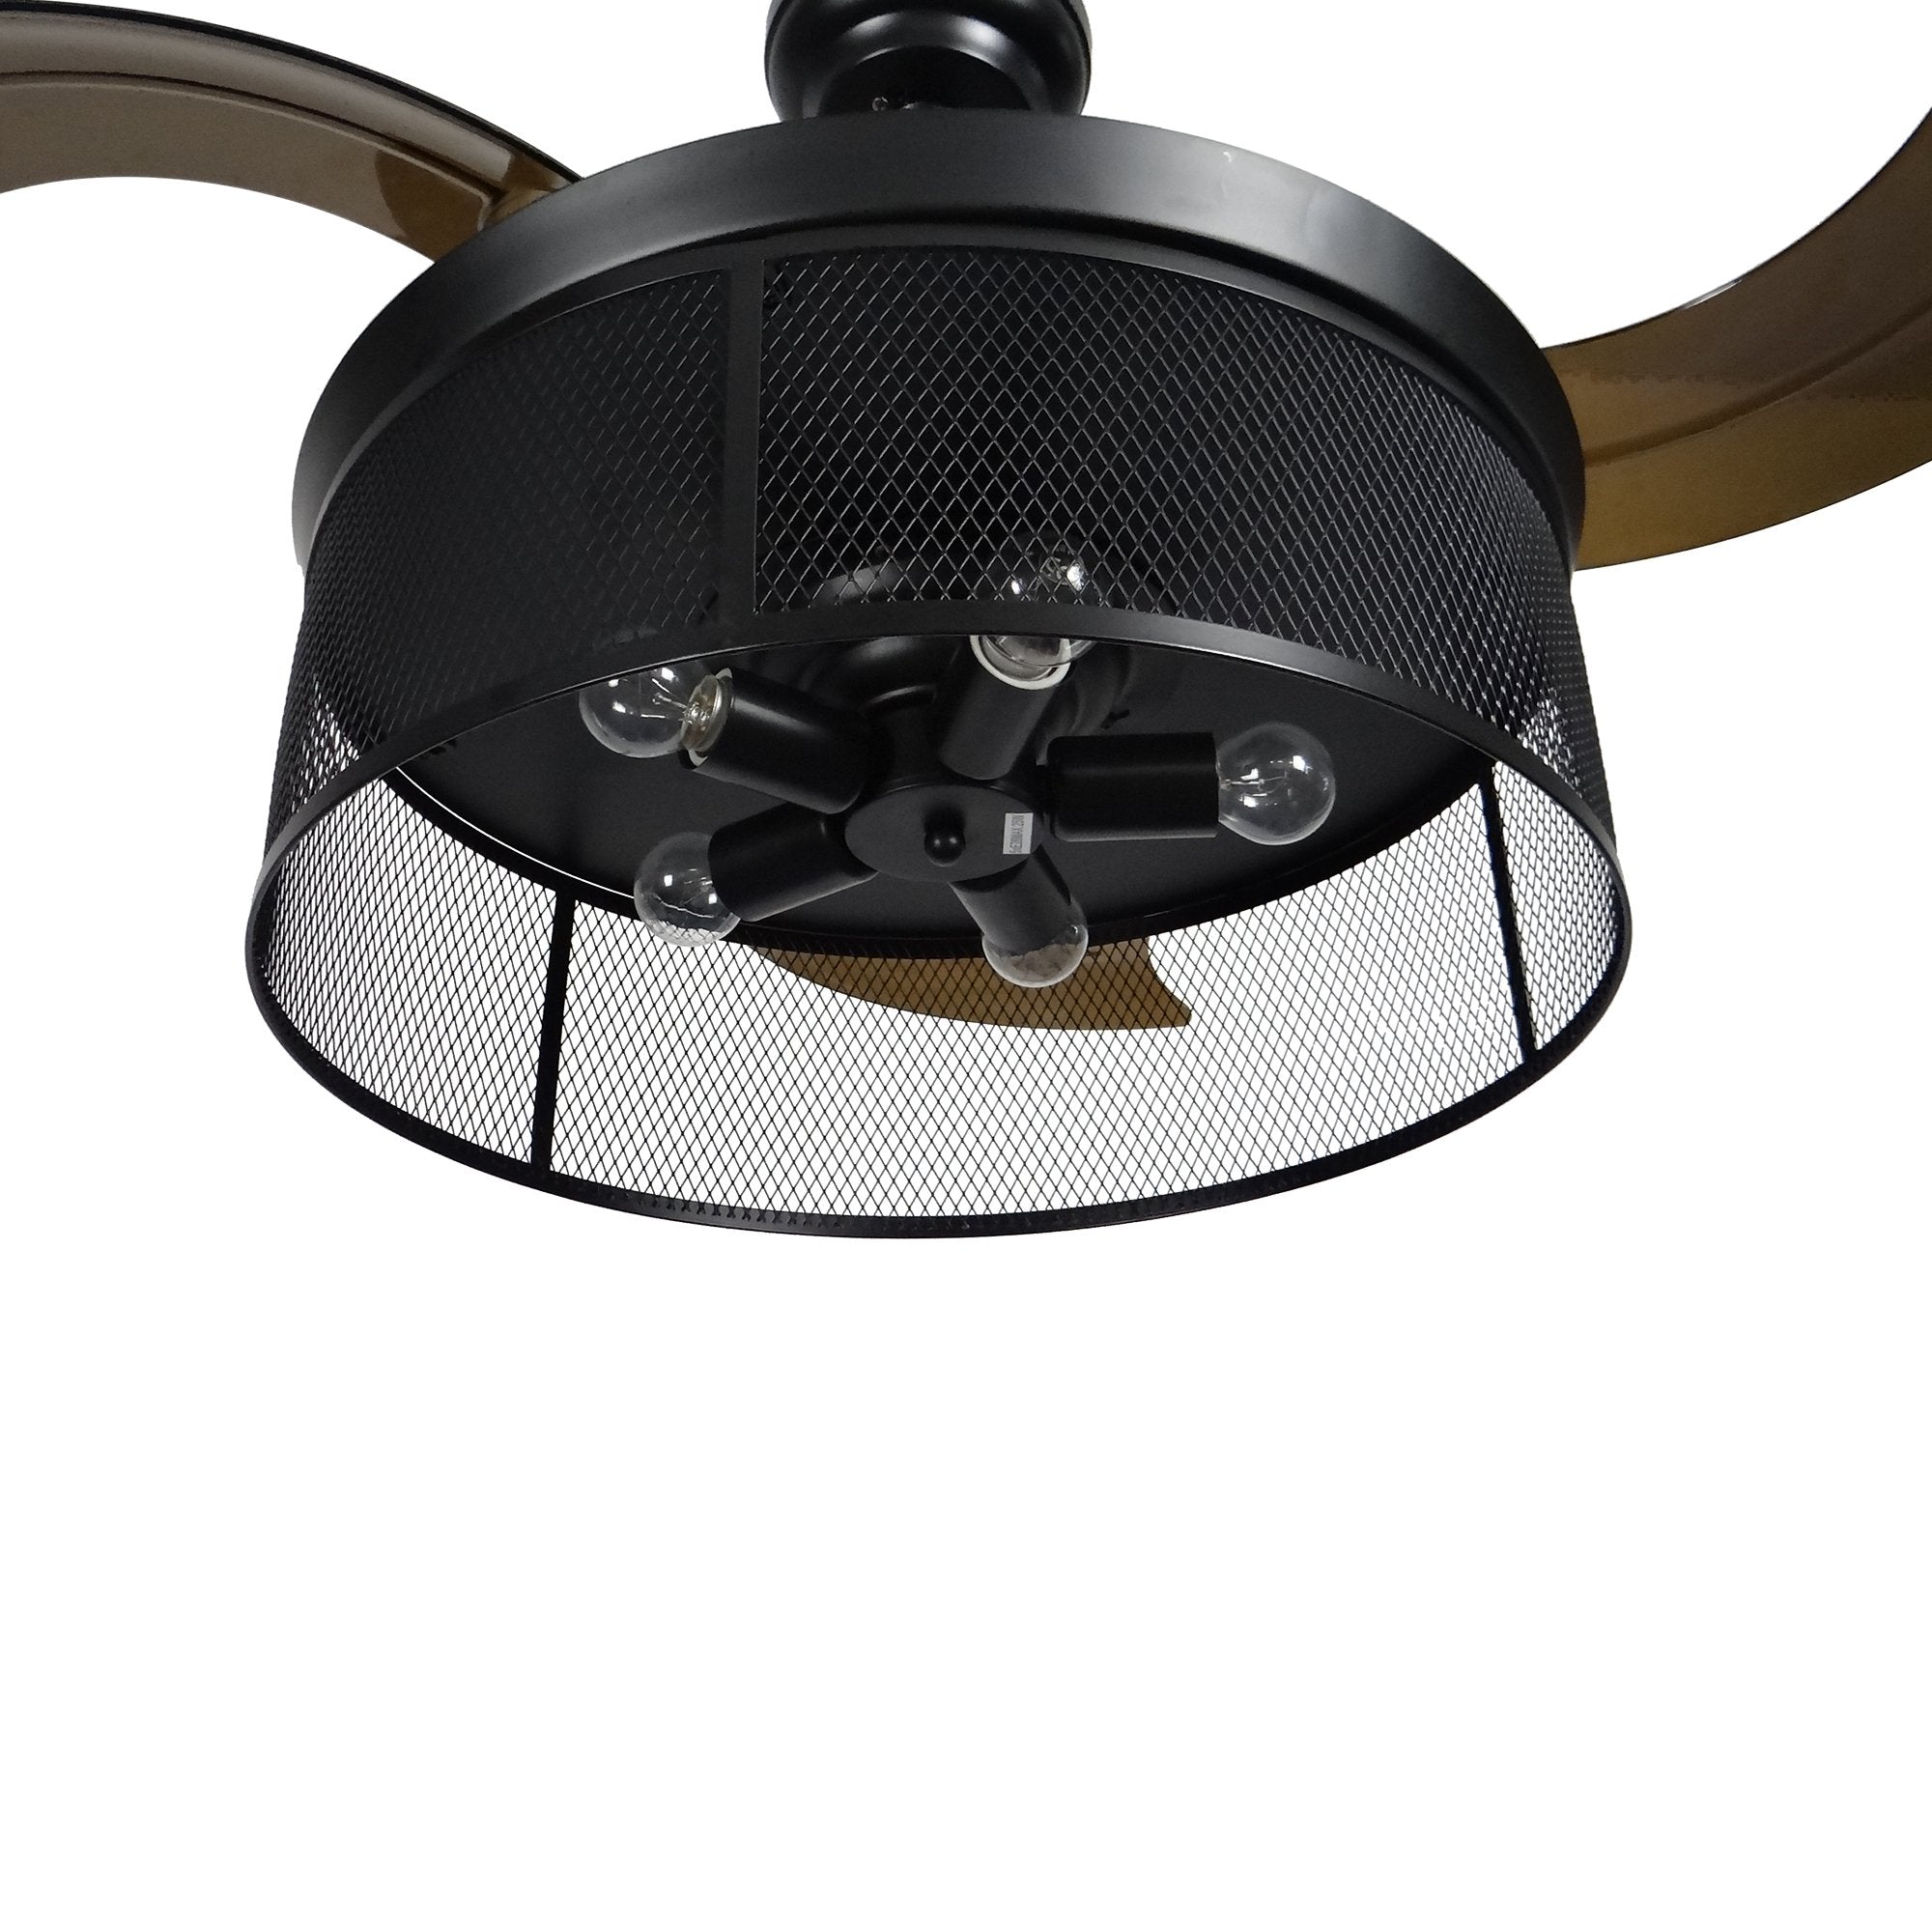 Paloma 42 Inch 3-Blade Retractable Best Smart Ceiling Fan With Wall Switch